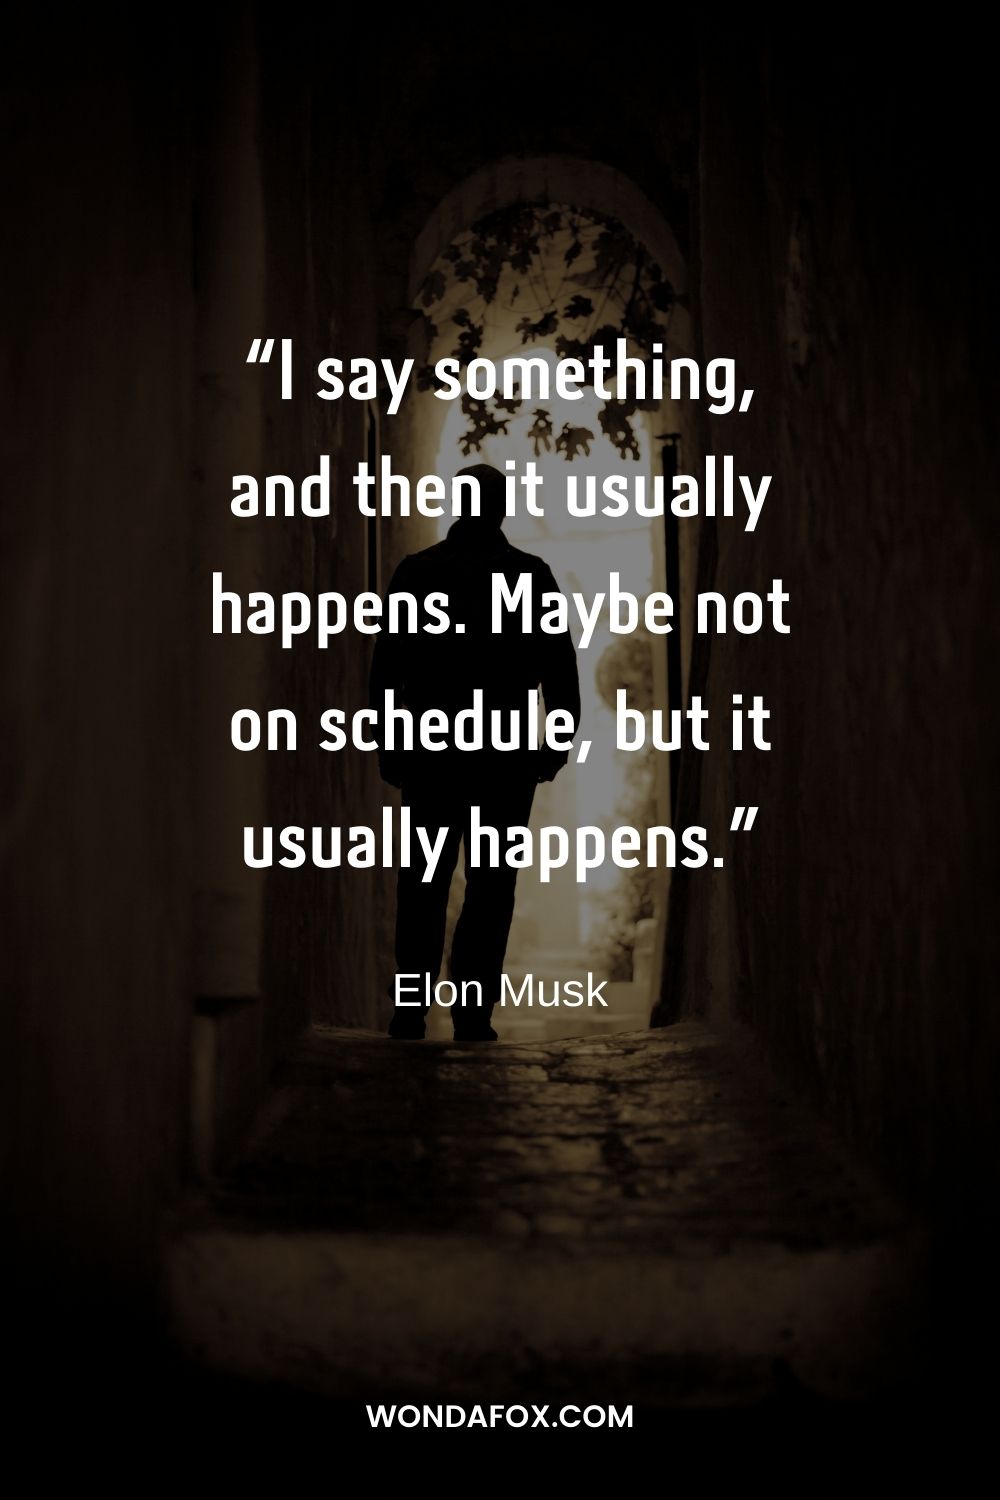 “I say something, and then it usually happens. Maybe not on schedule, but it usually happens.”